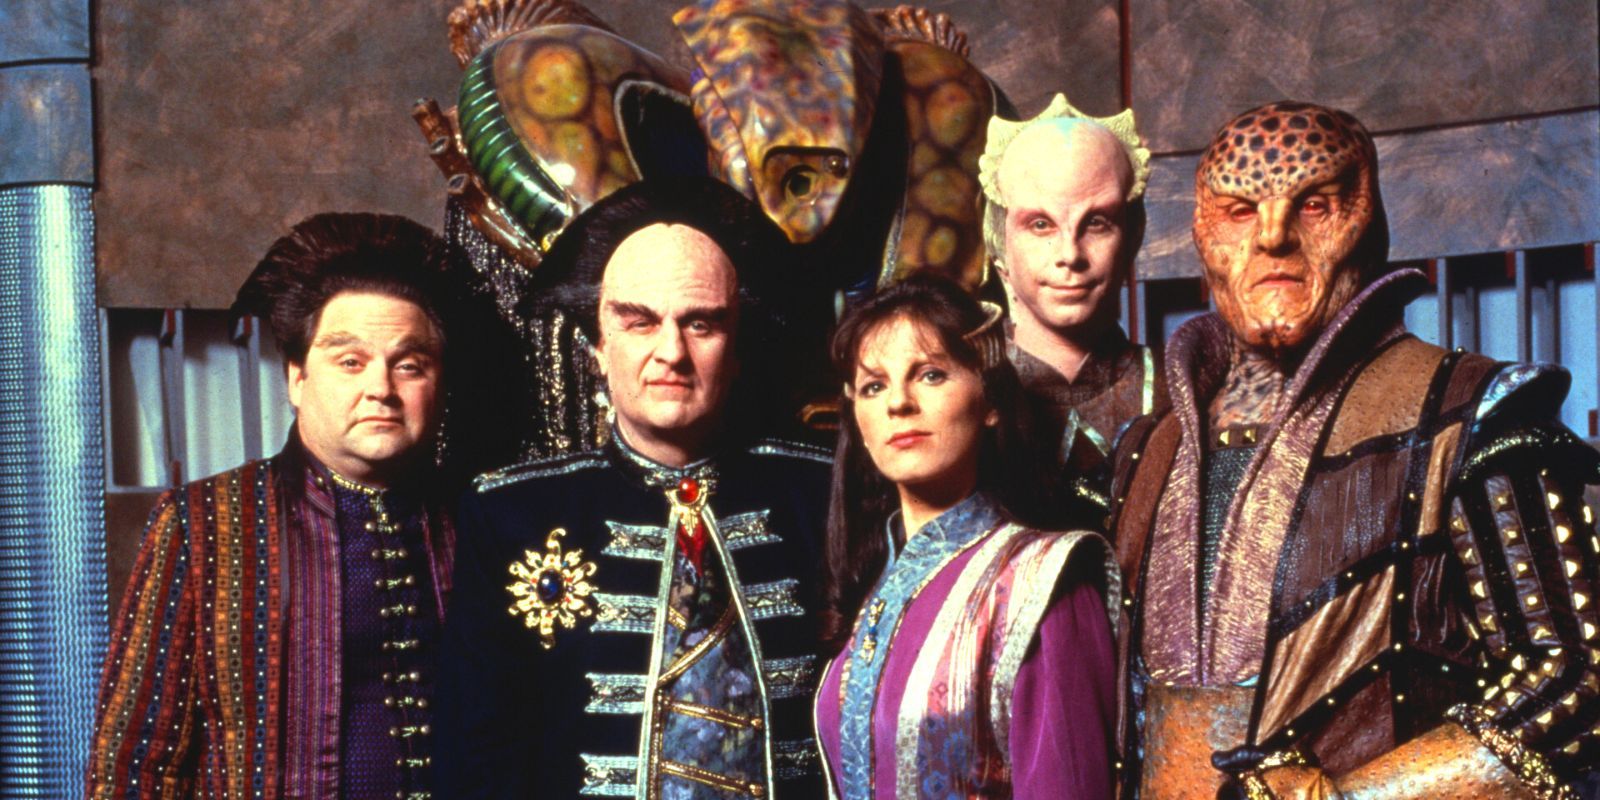 The crew of Babylon 5 posing for a photo